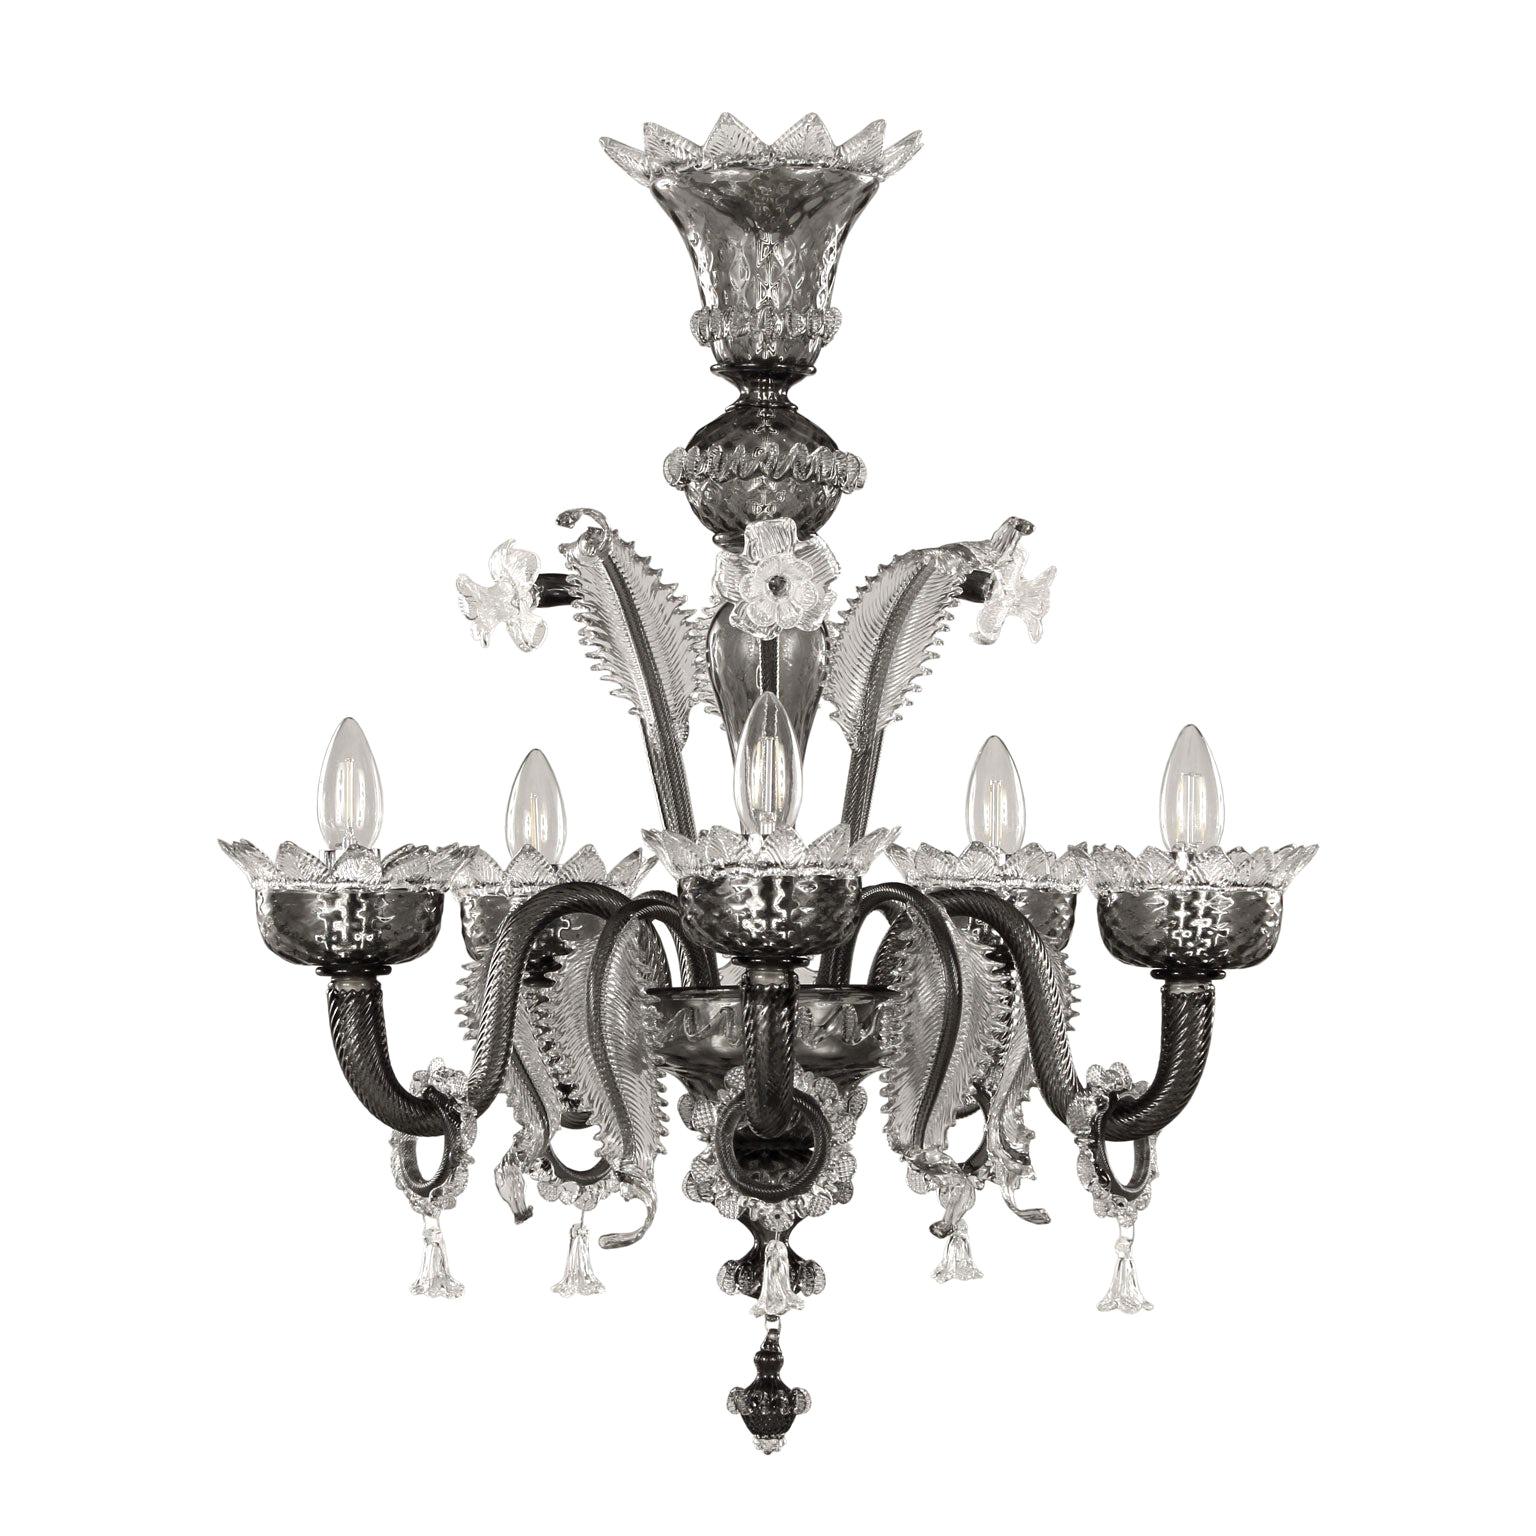 Venetian style Chandelier 5 arms Grey Murano Glass Clear Details by Multiforme